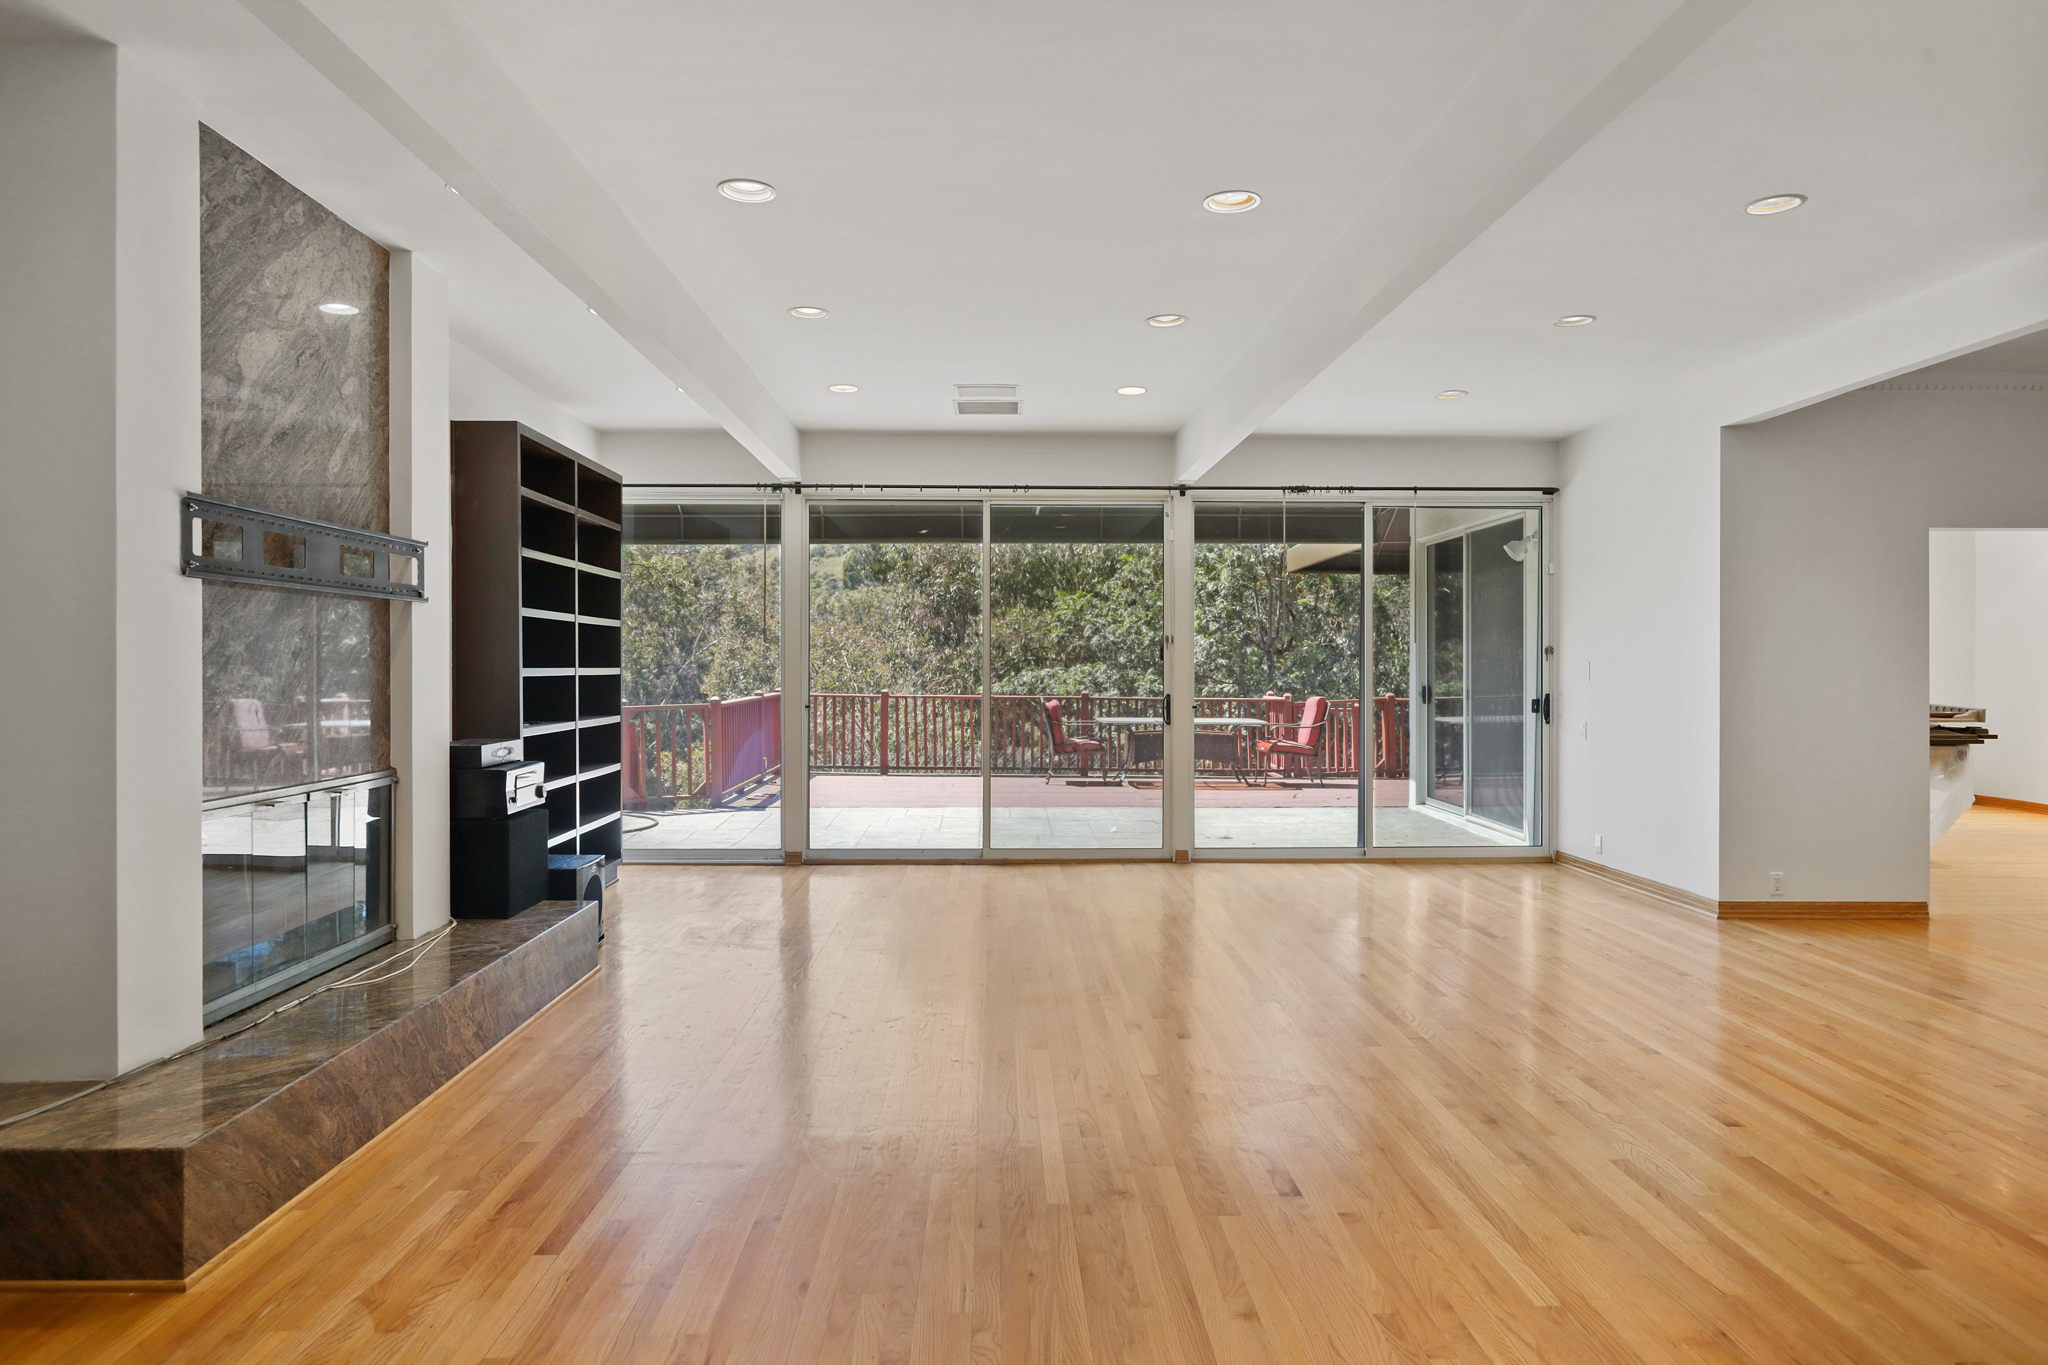 2469 Crest View Dr, Los Angeles, CA 90046, USA Photo 5